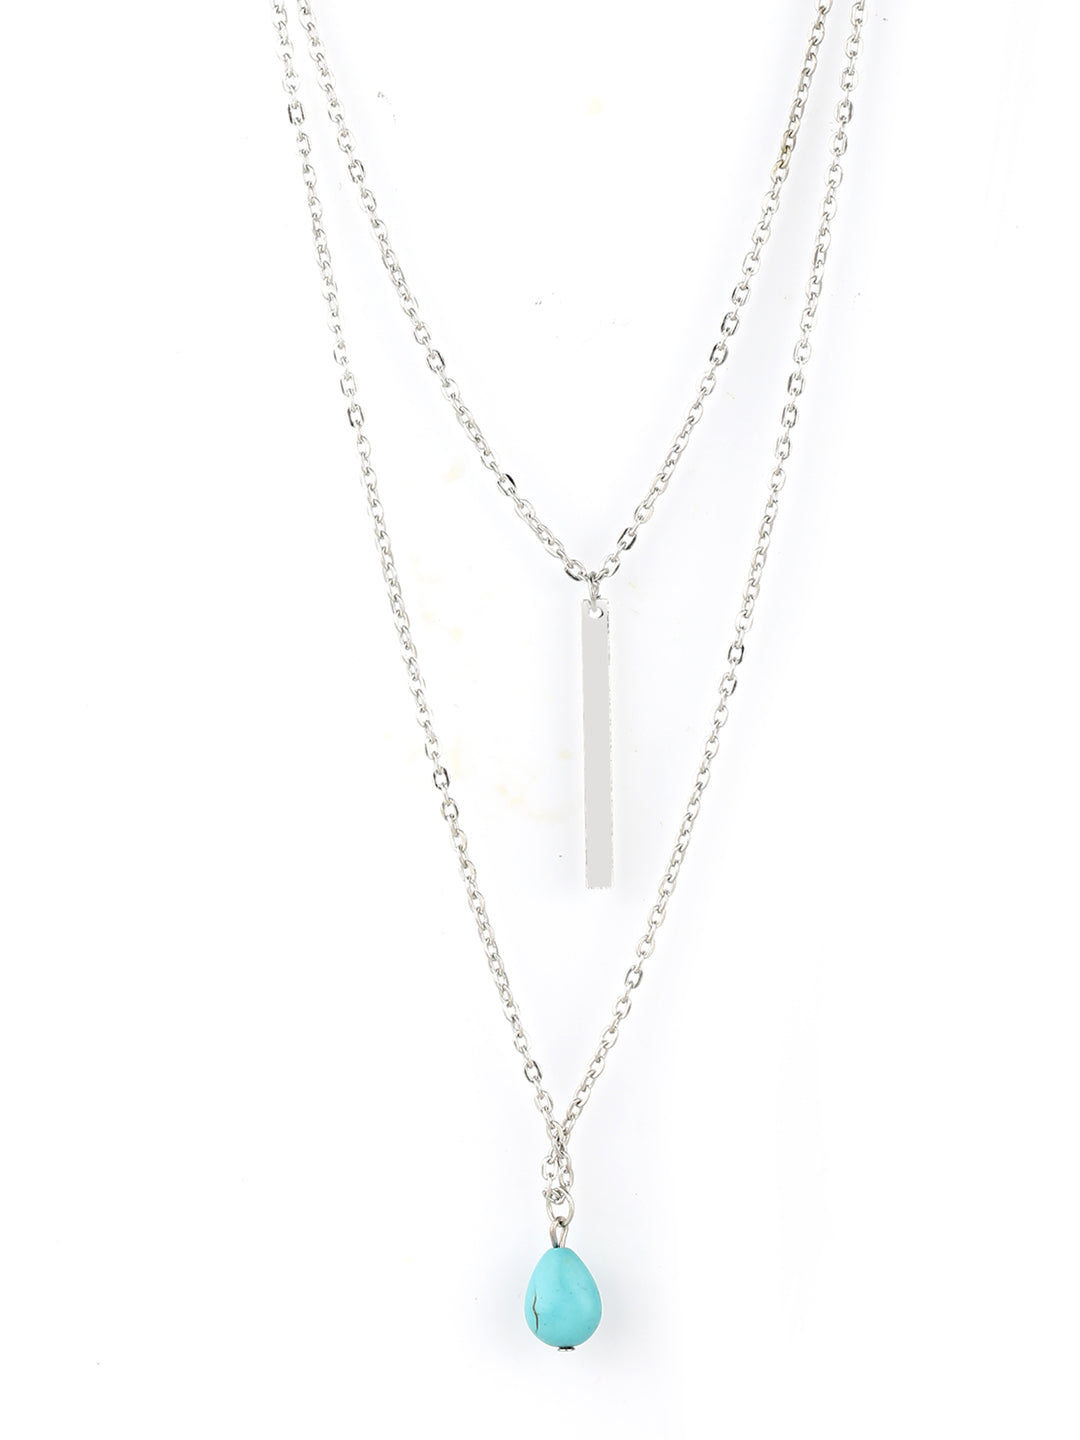 Women's  Blue Stone Silver Plated Layered Necklace - Priyaasi